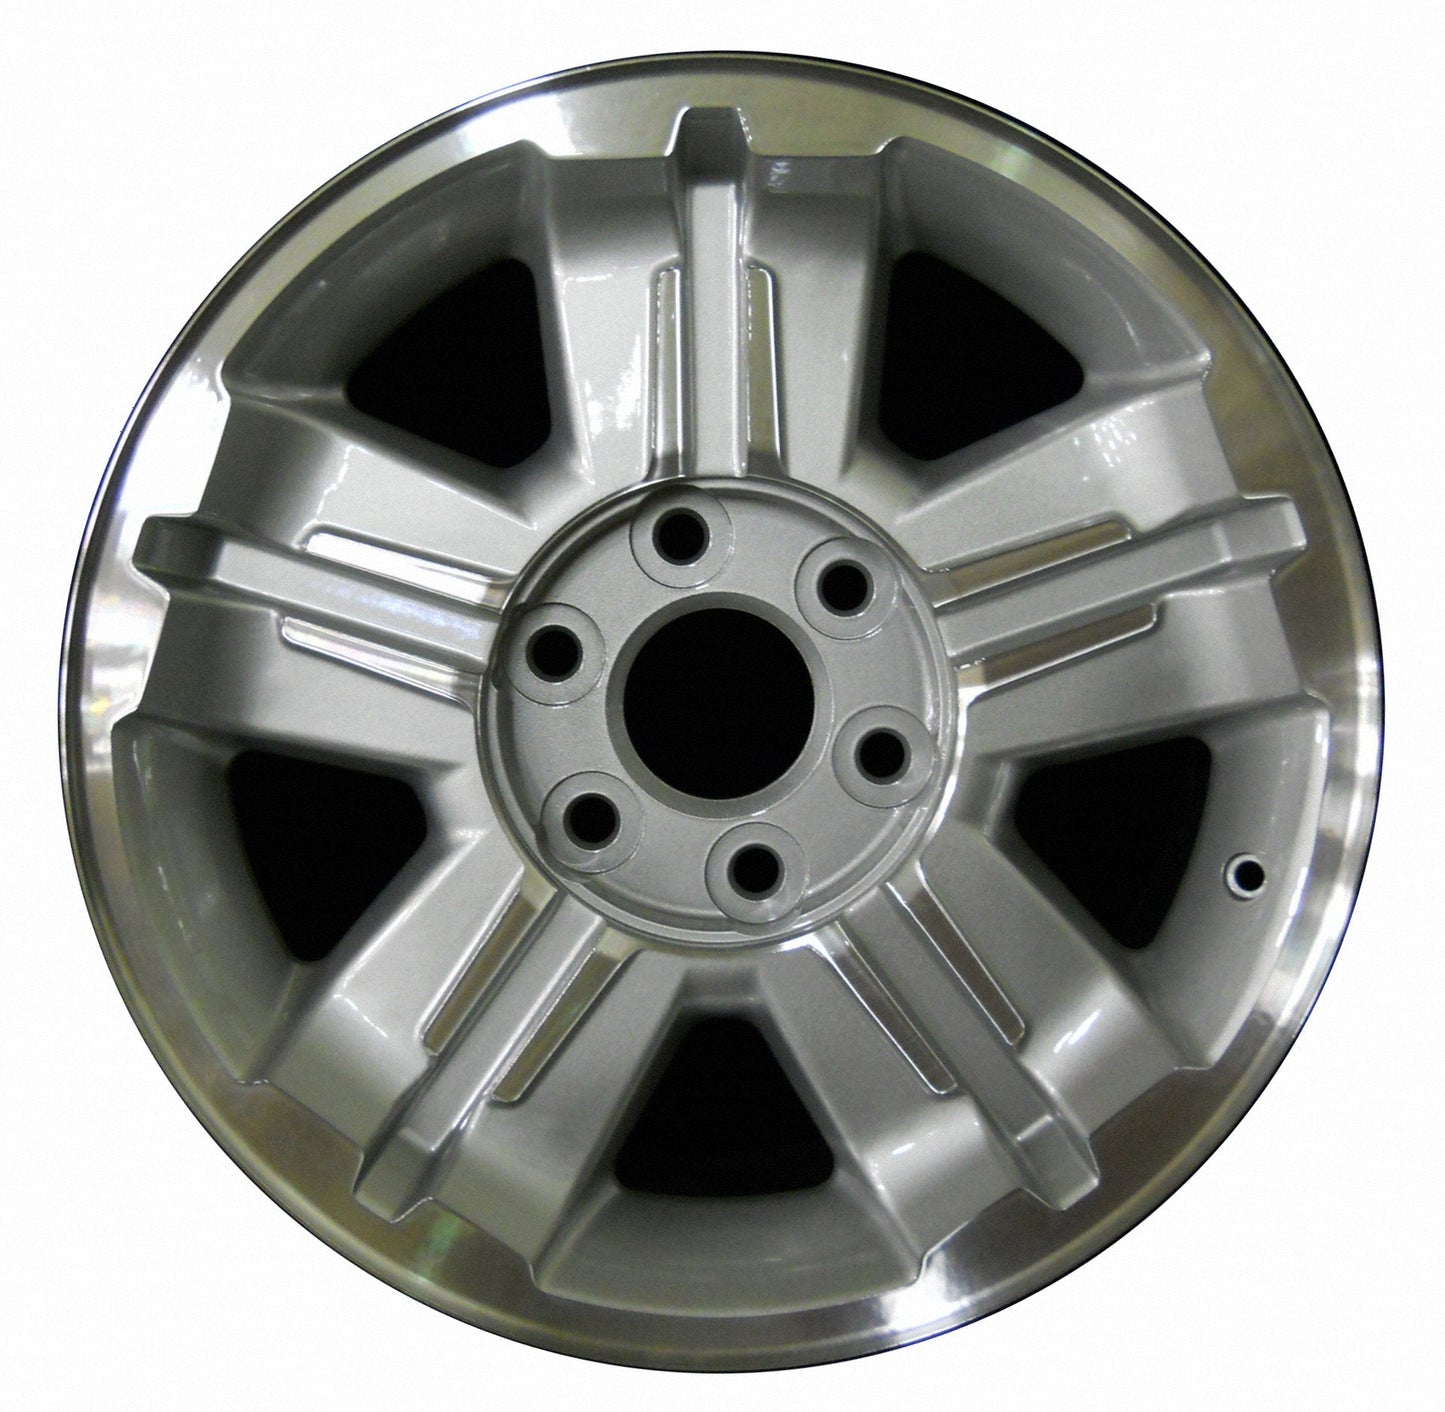 Chevrolet Avalanche  2007, 2008, 2009, 2010, 2011, 2012, 2013 Factory OEM Car Wheel Size 18x8 Alloy WAO.5300.PS09.MA